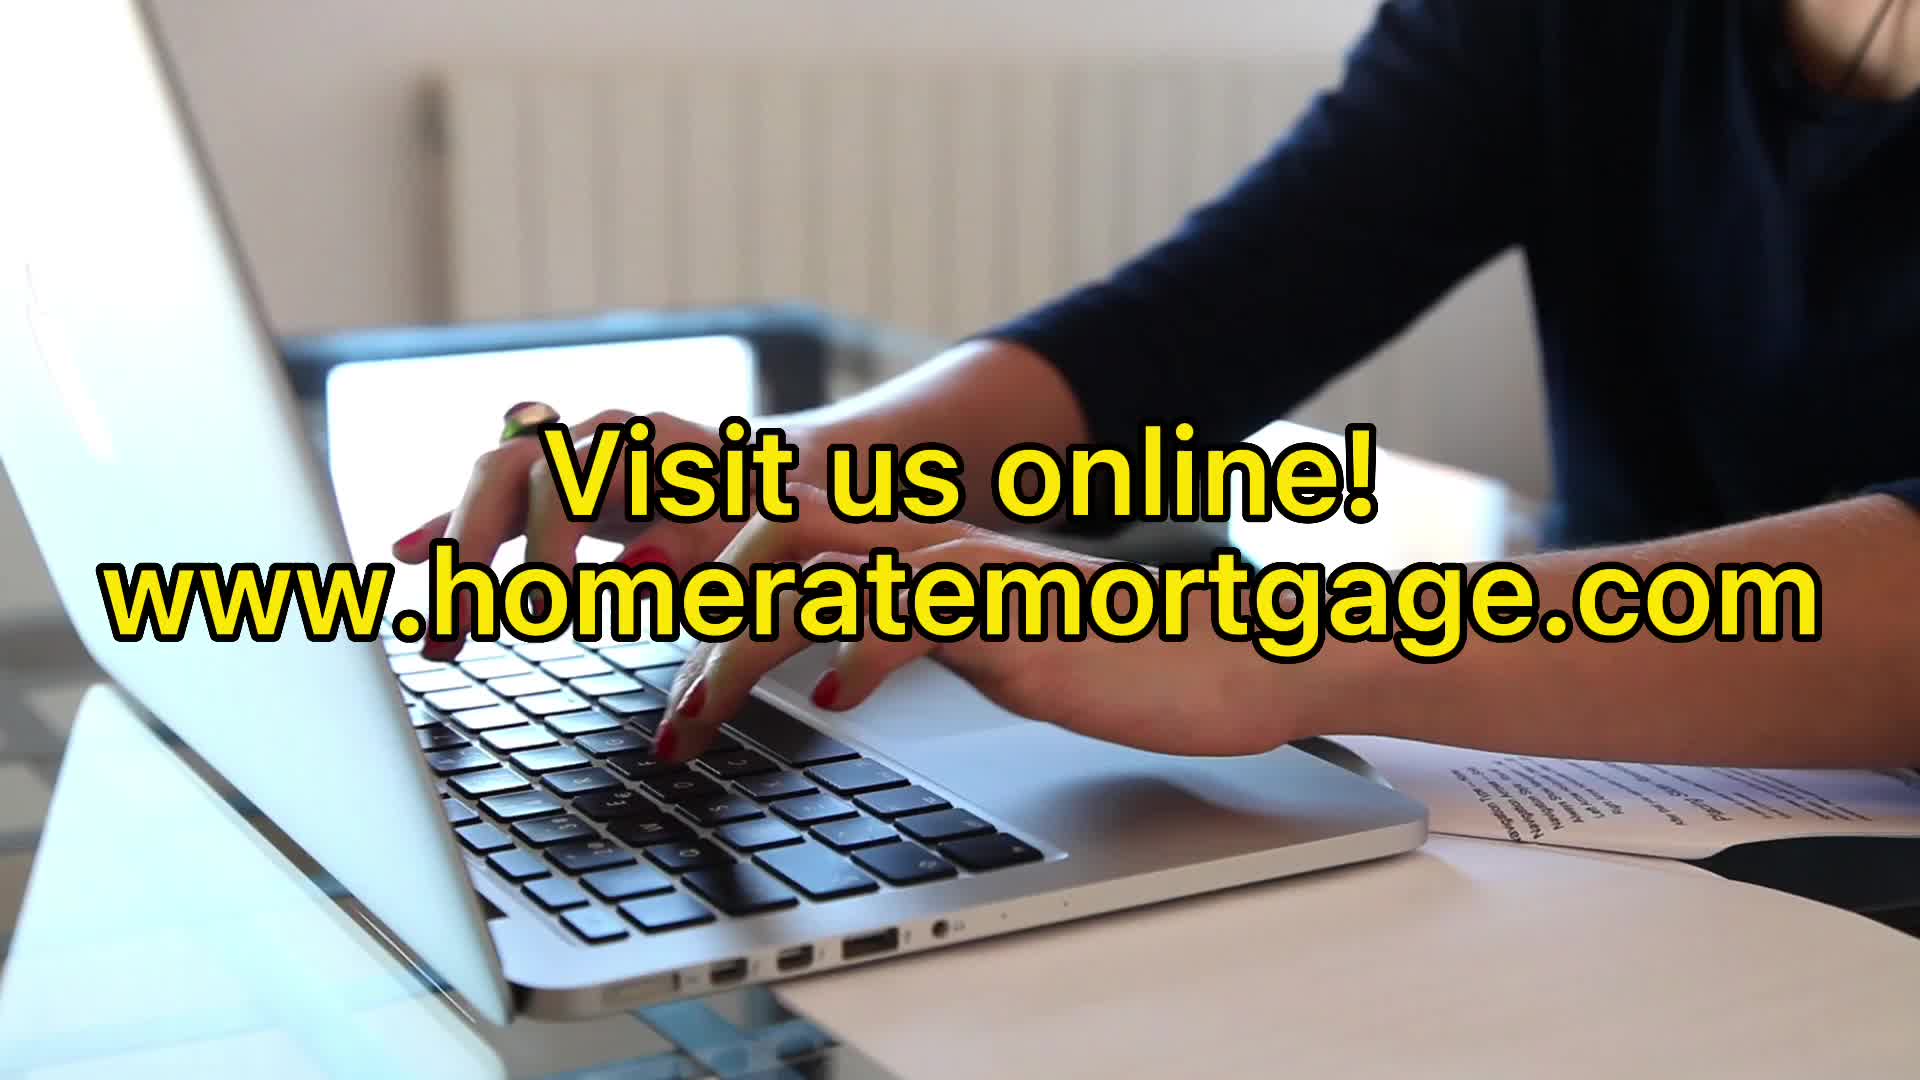 Home Rate Mortgage